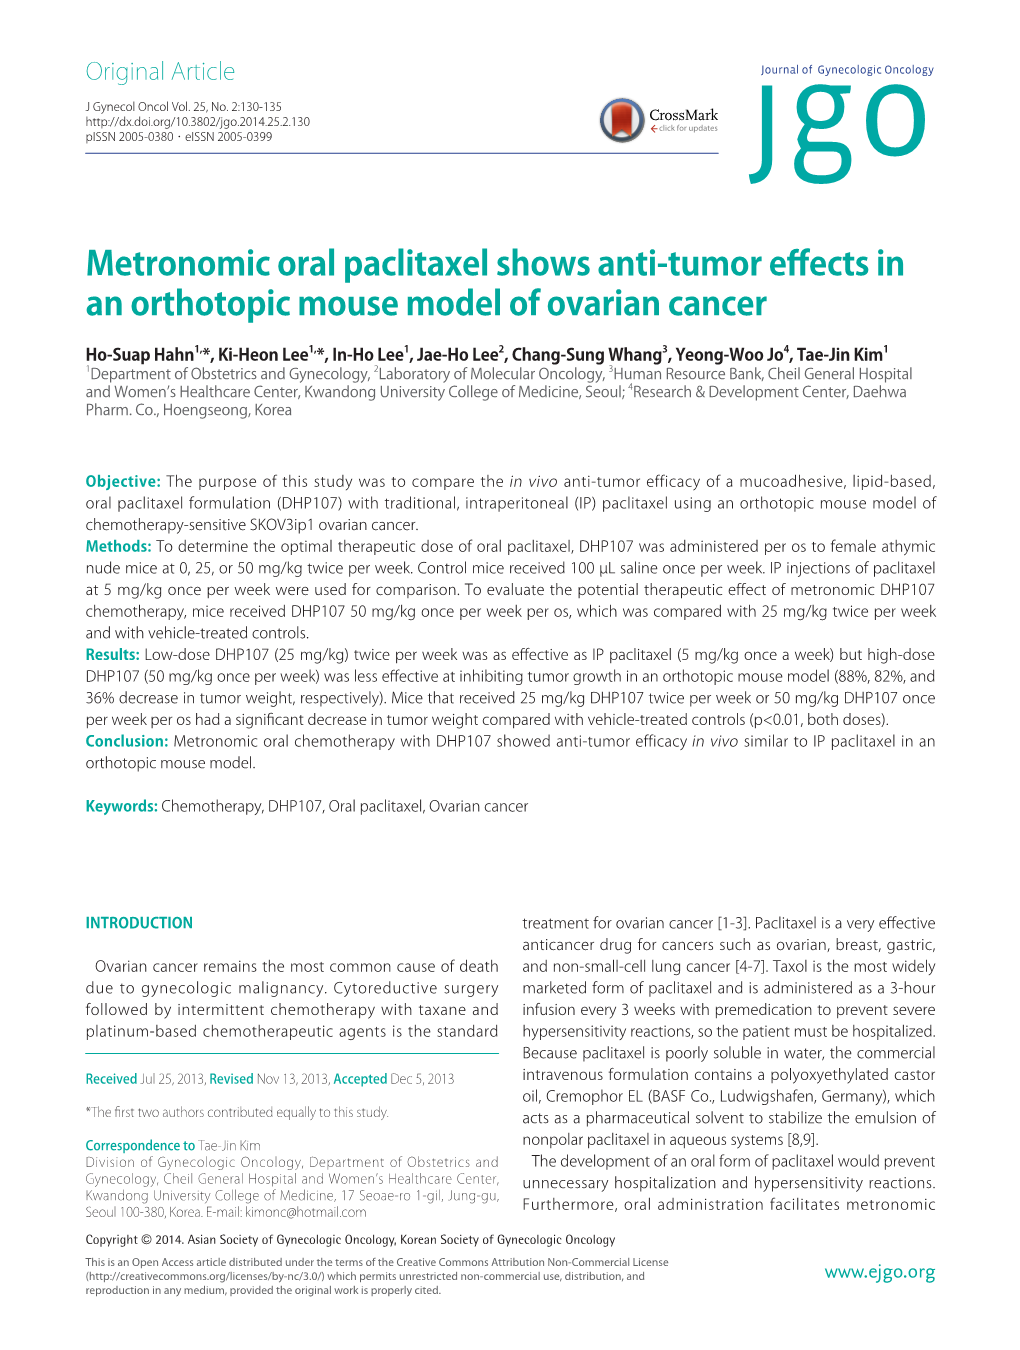 Metronomic Oral Paclitaxel Shows Anti-Tumor Effects in an Orthotopic Mouse Model of Ovarian Cancer